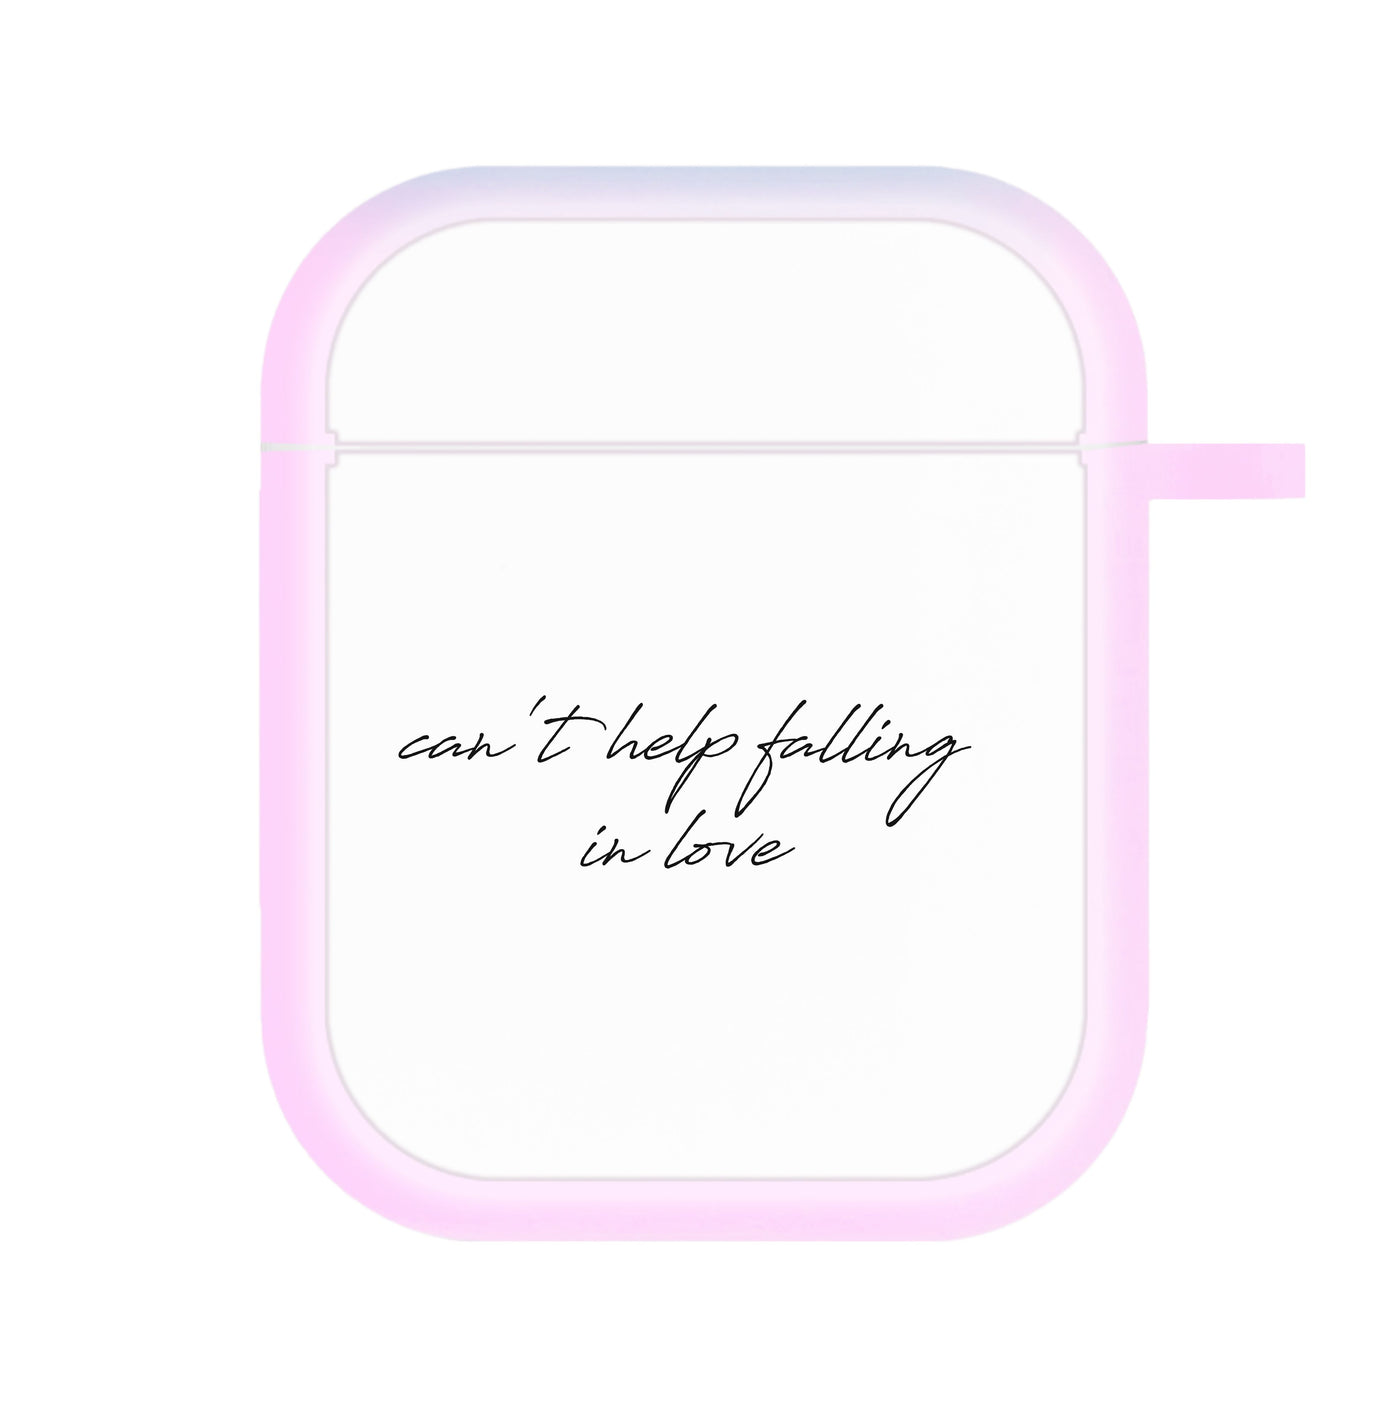 Can't Help Falling In Love - Elvis AirPods Case